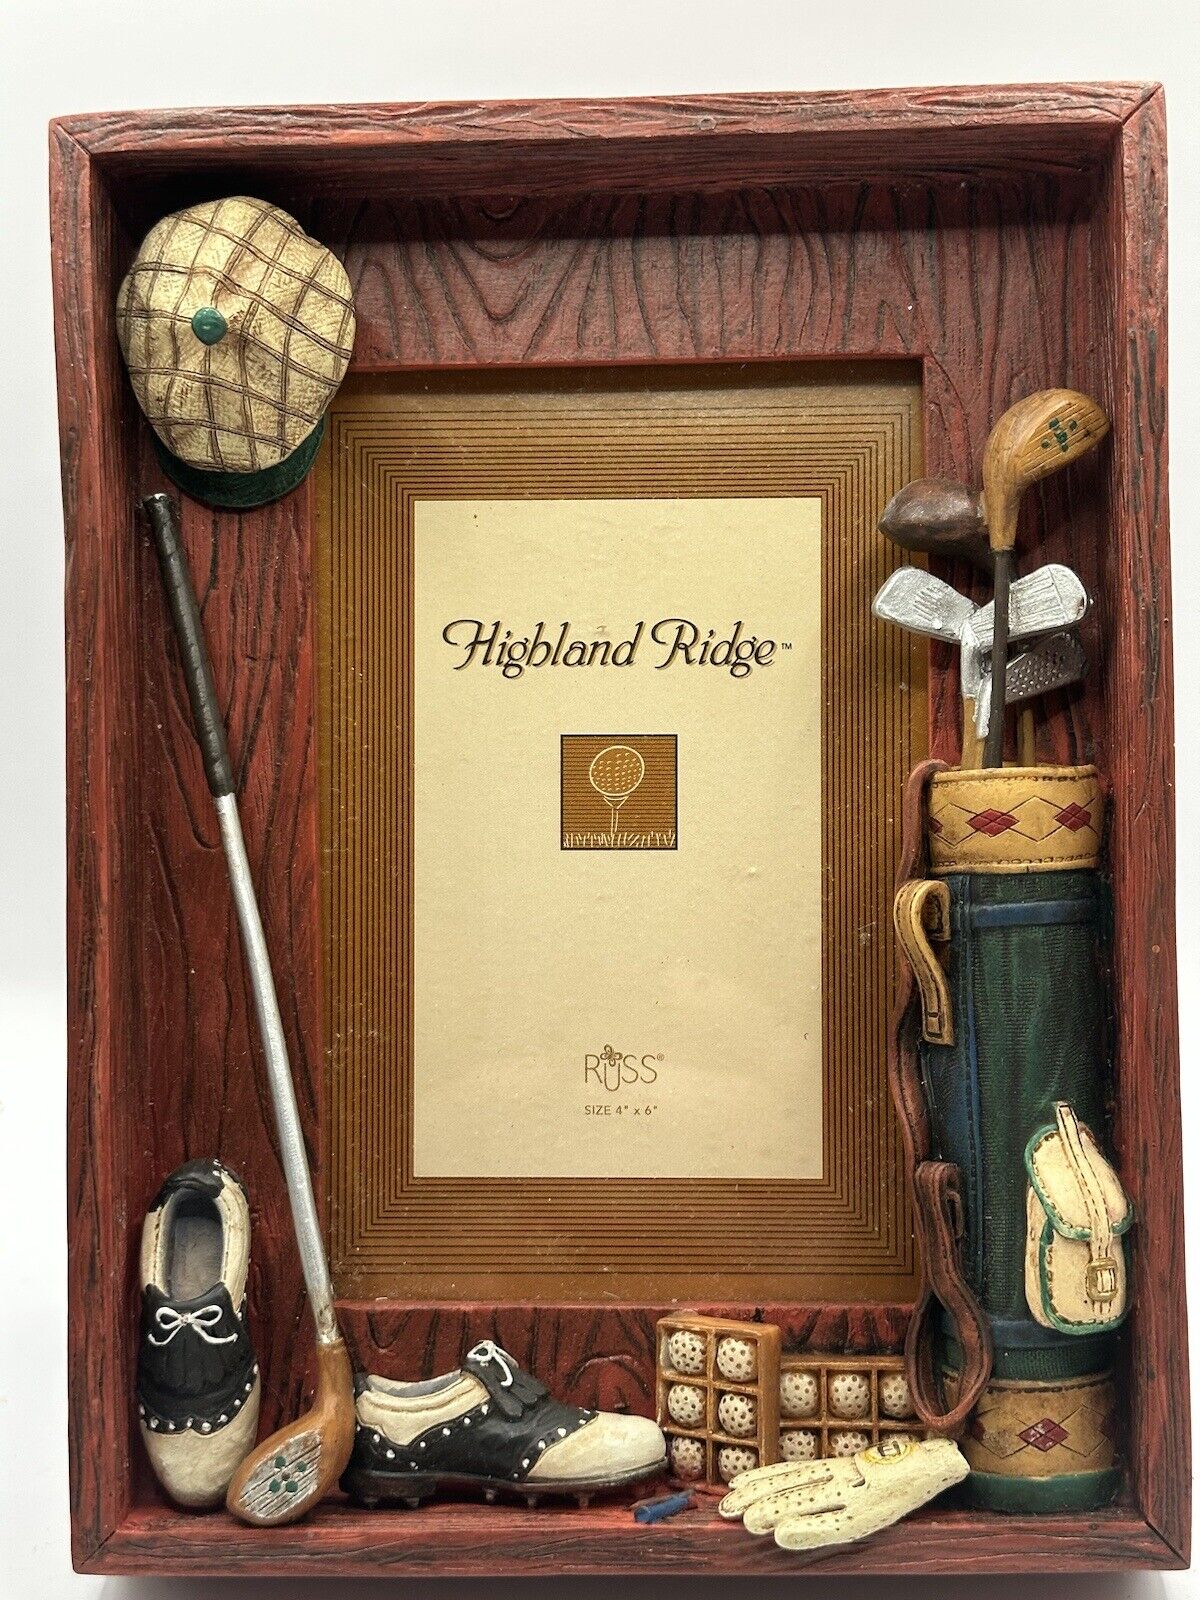 NEW RUSS BERRIE AND CO. HIGHLAND RIDGE GOLF PHOTO FRAME WITH FUN GOLFERS DETAIL